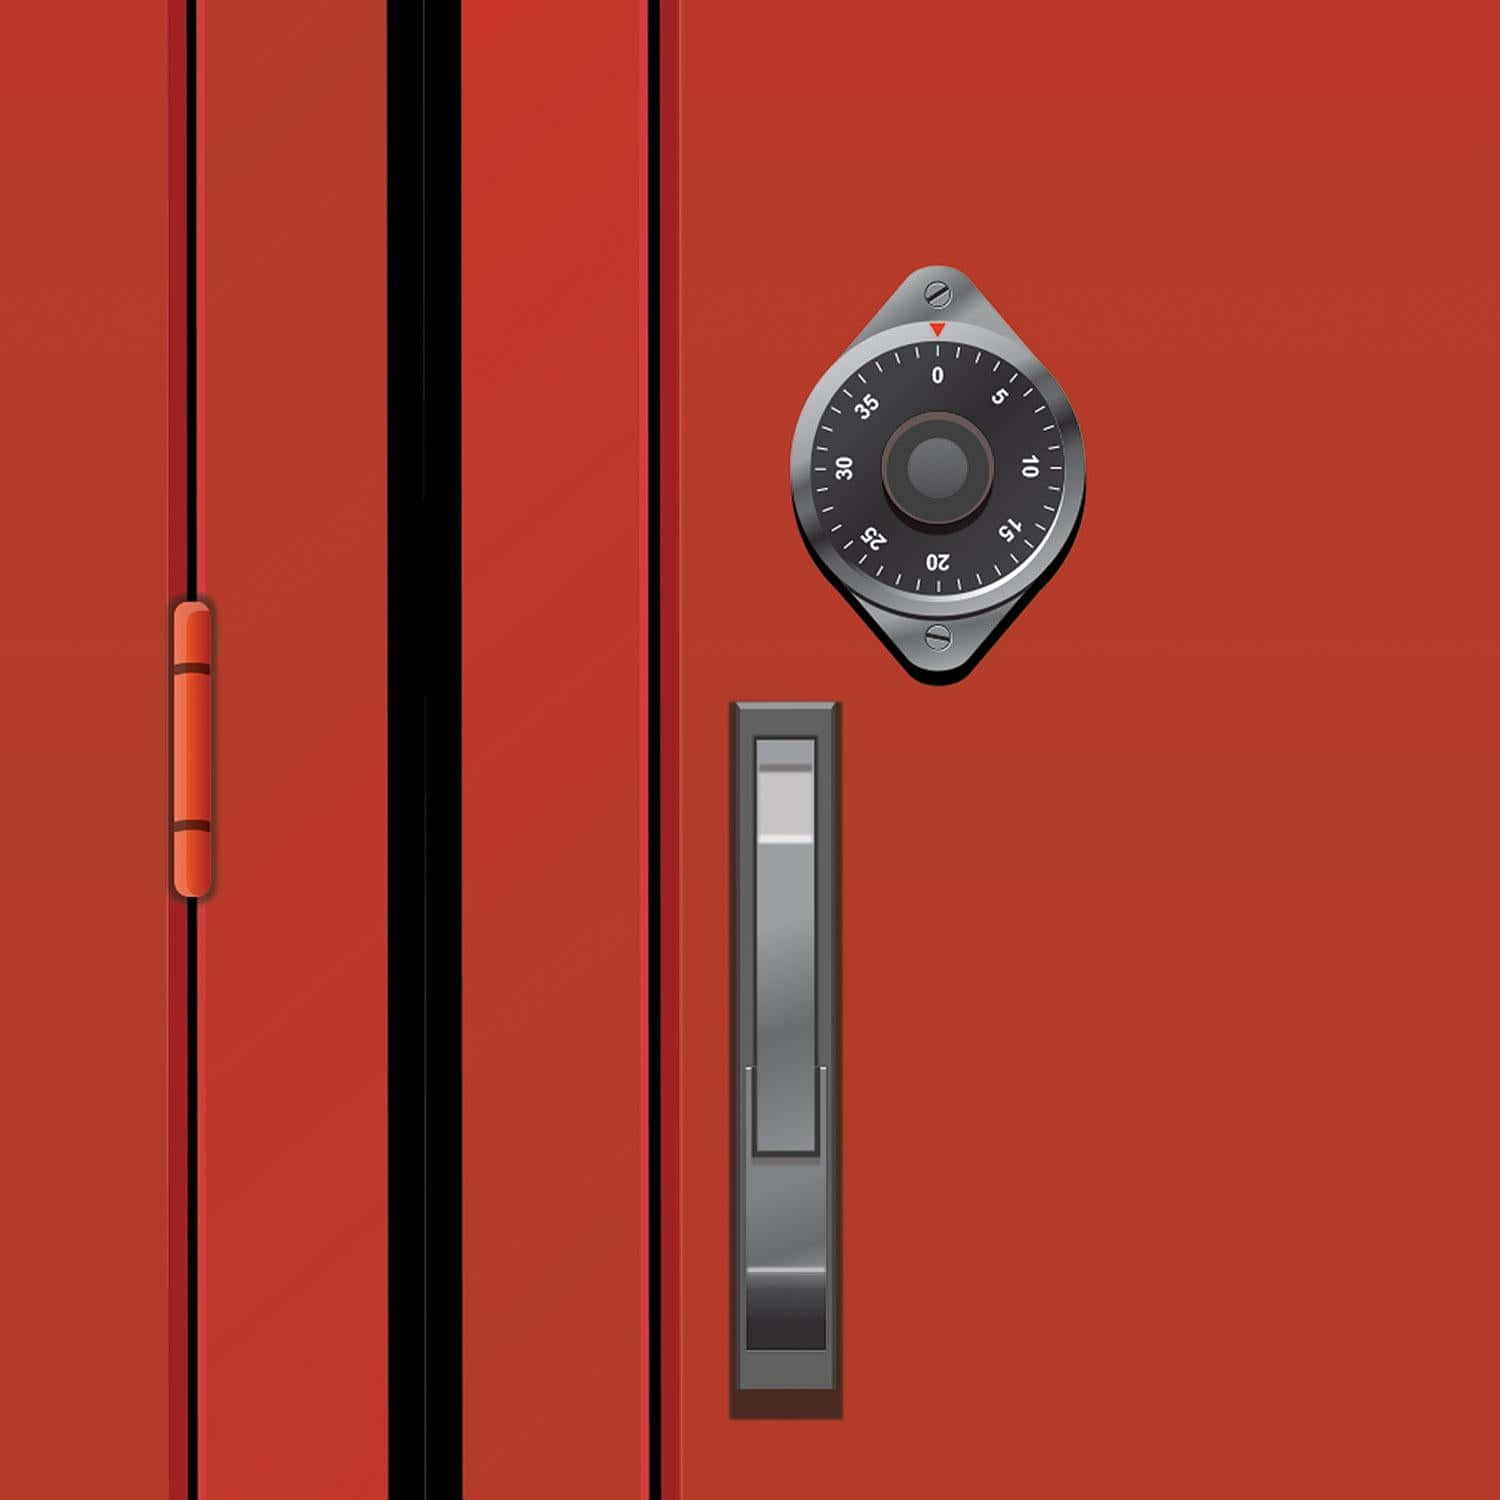 A Red Door With A Lock And Key